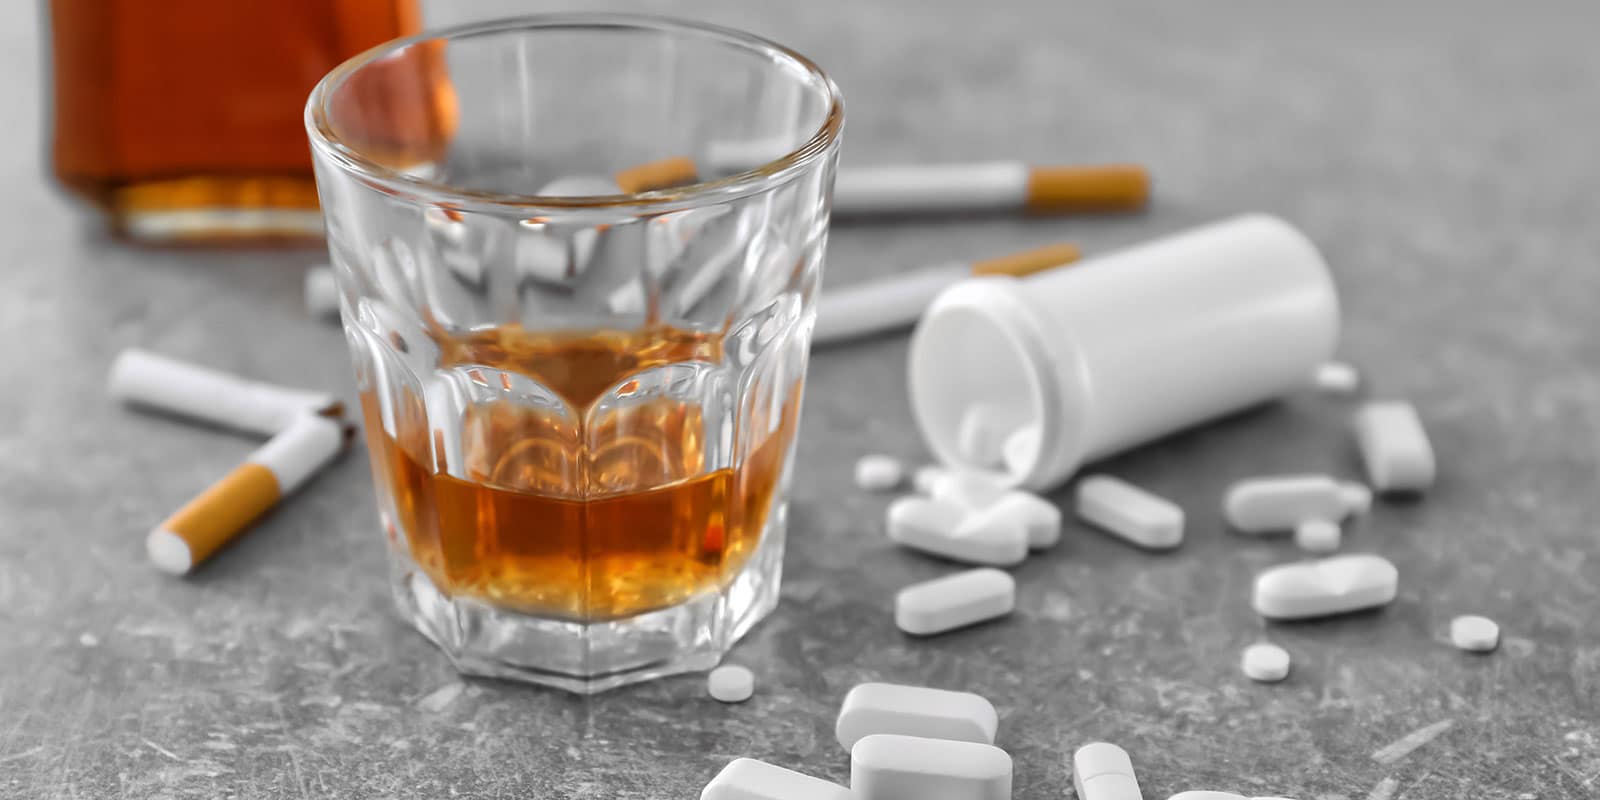 Understanding the Dangers of Combining Drugs and Alcohol